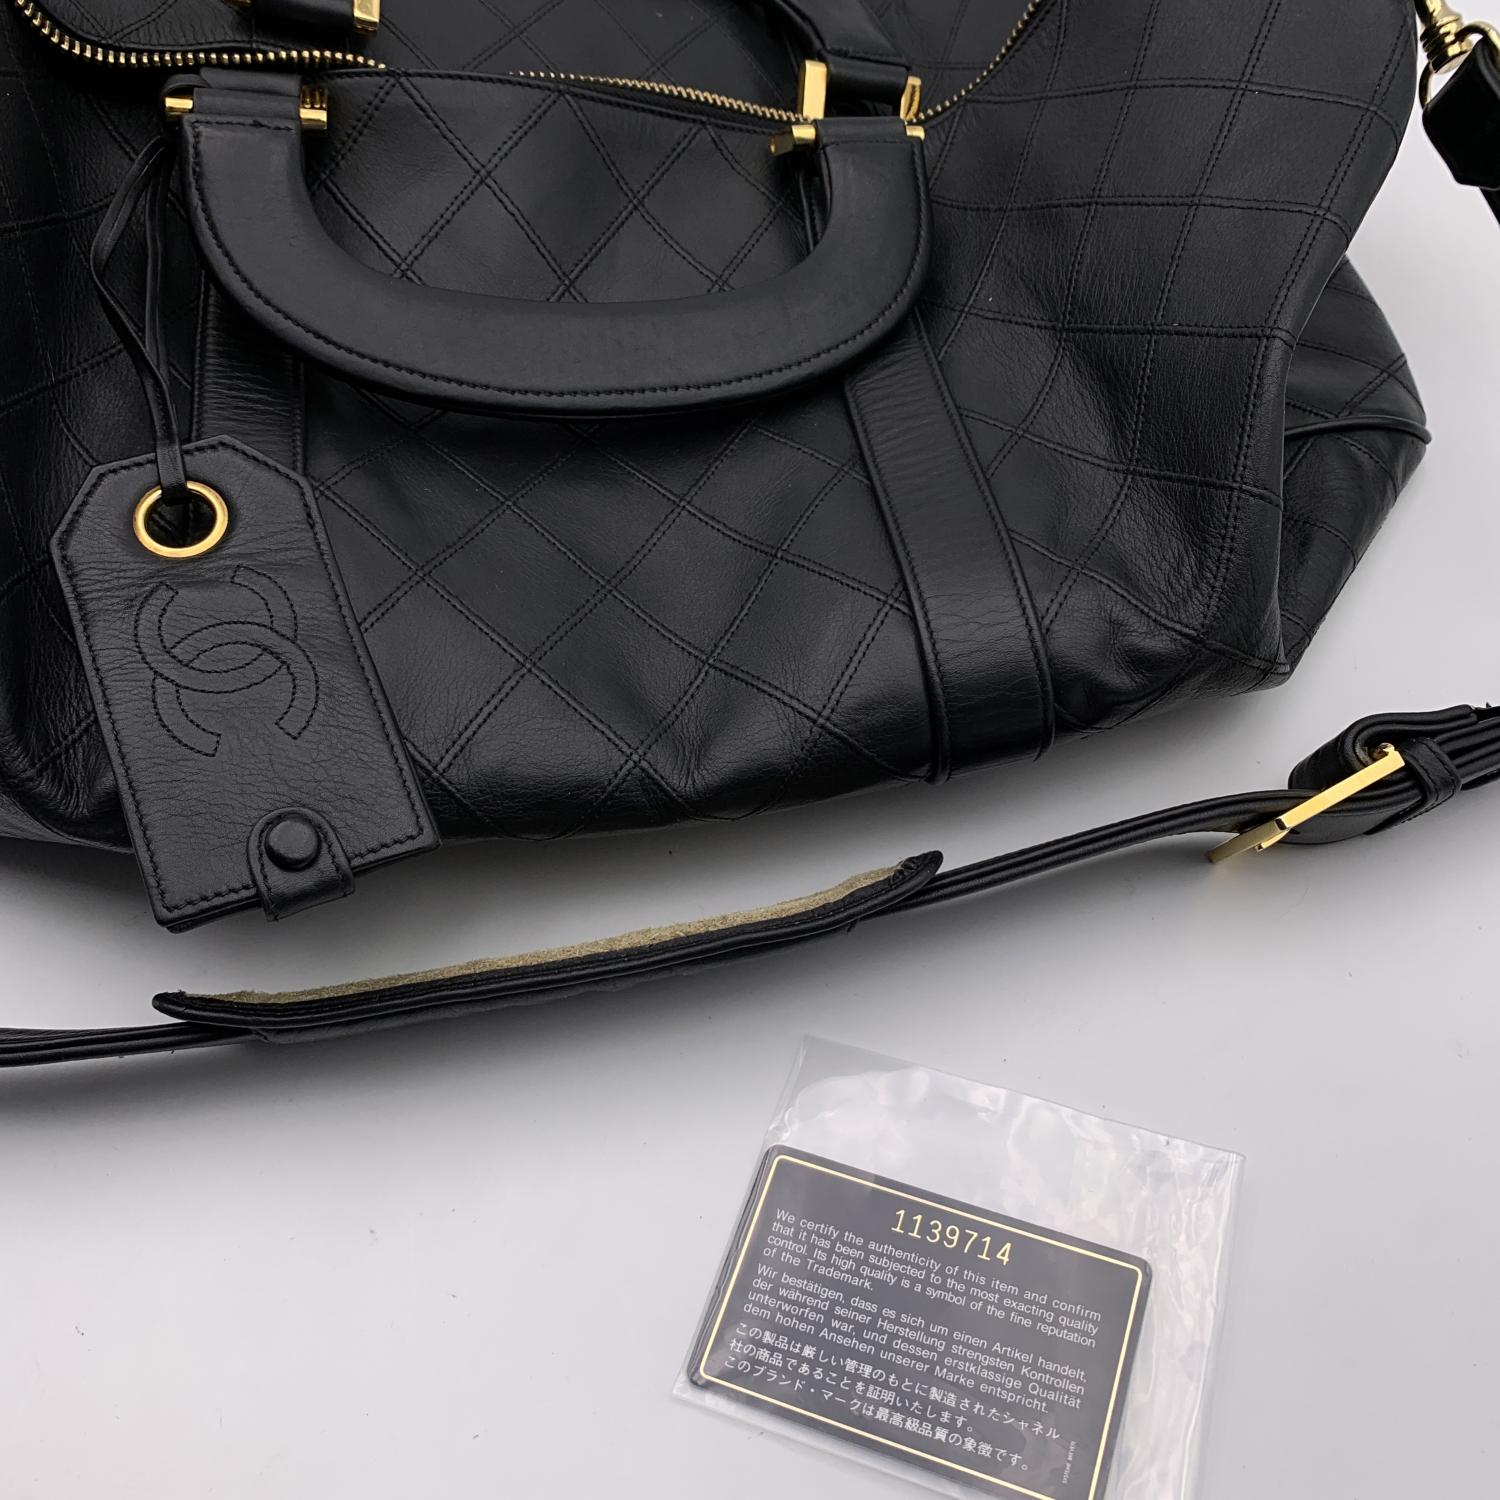 Chanel Black Quilted Leather Large Duffle Bag Weekender with Strap 1